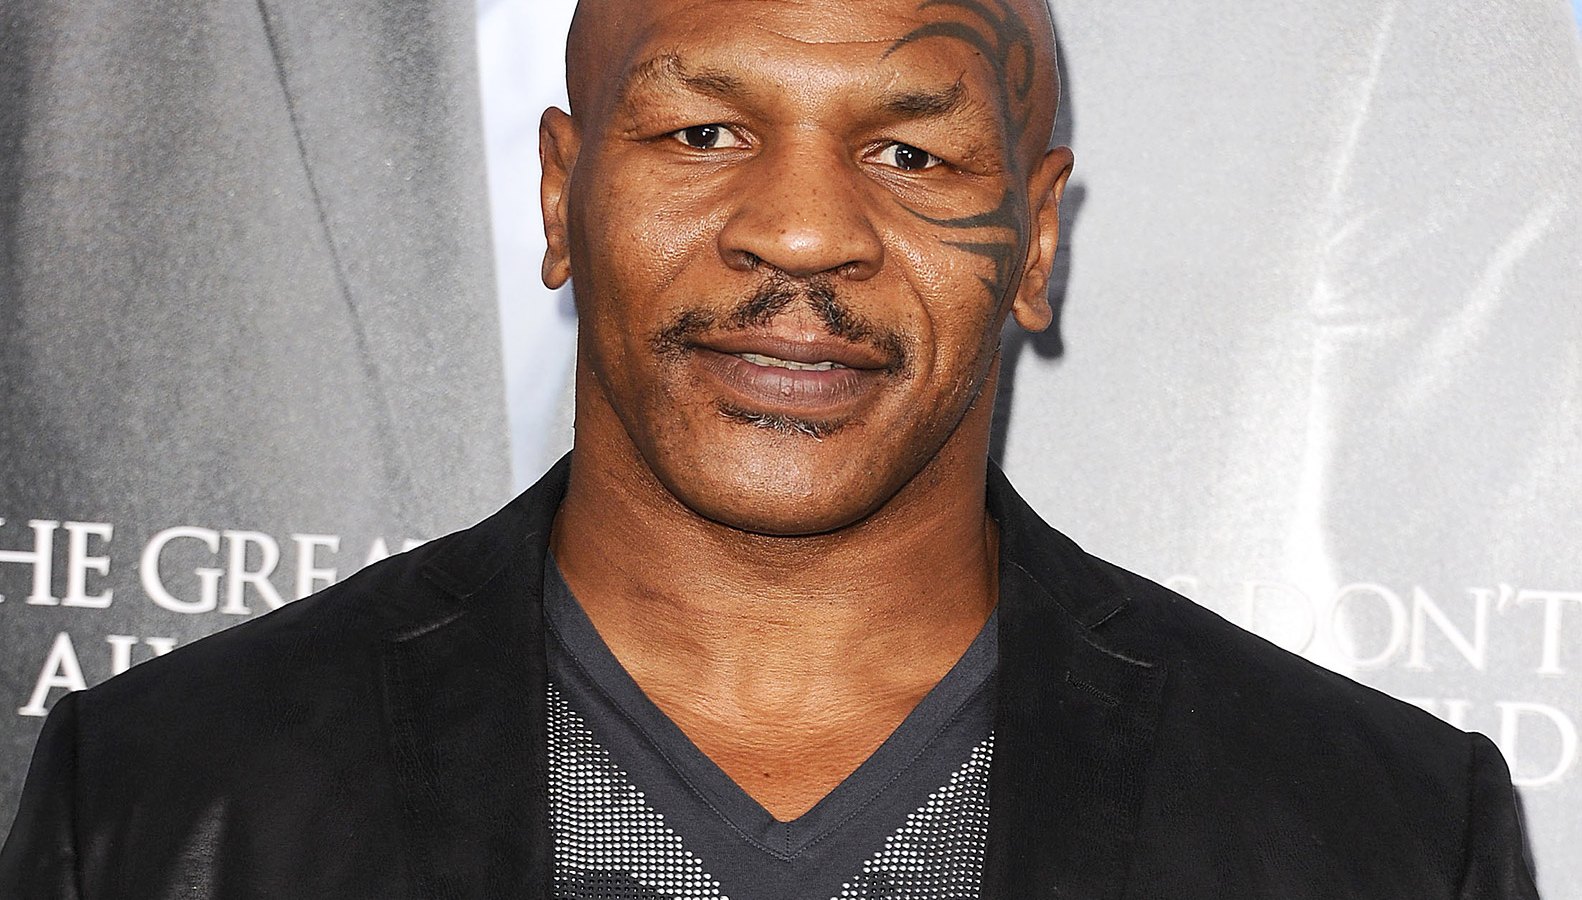 25 Things You Don't Know About Mike Tyson